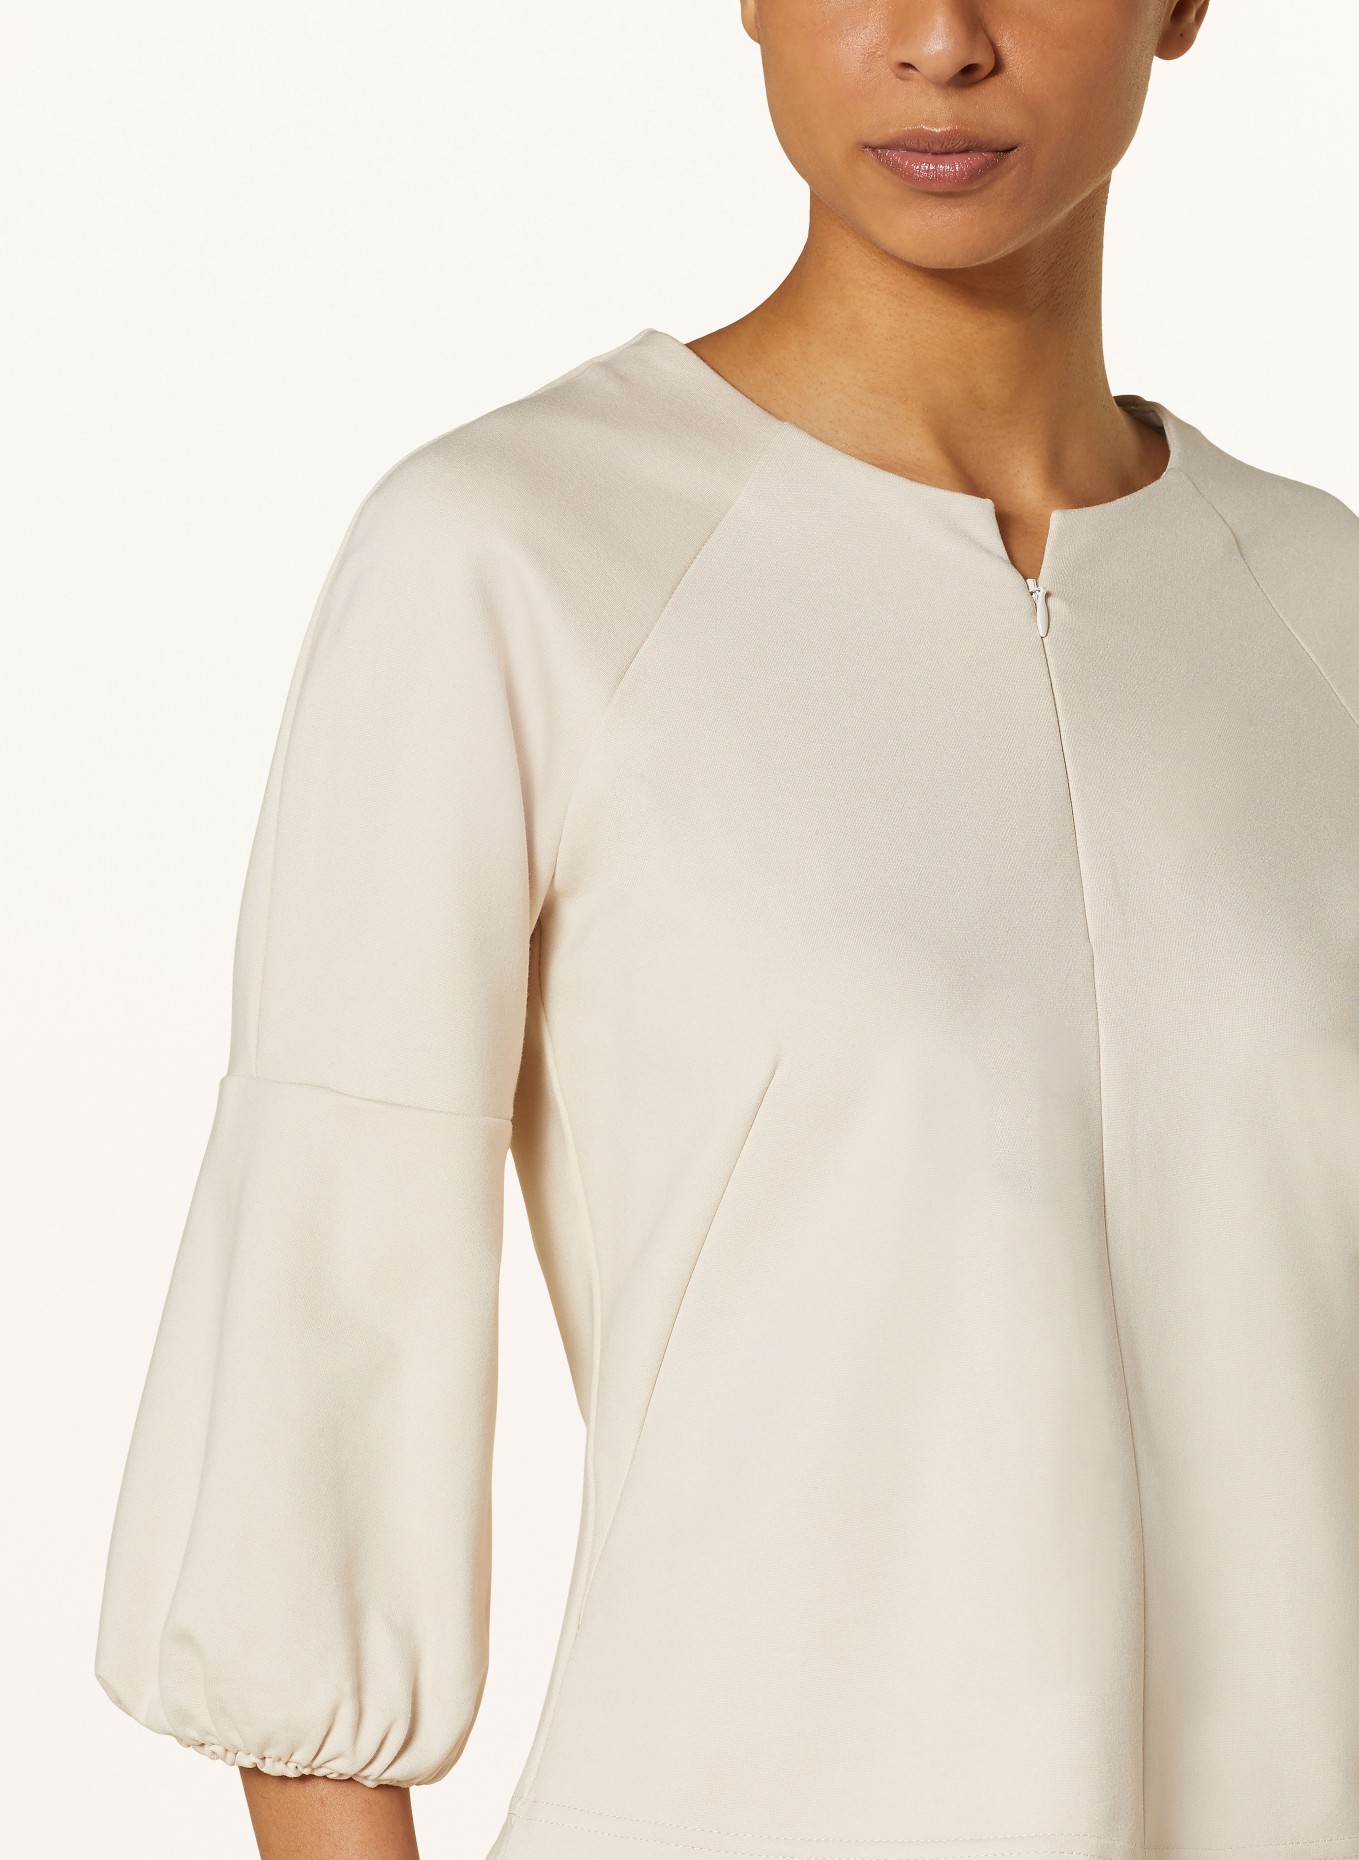 summum woman Shirt with 3/4 sleeves, Color: CREAM (Image 4)